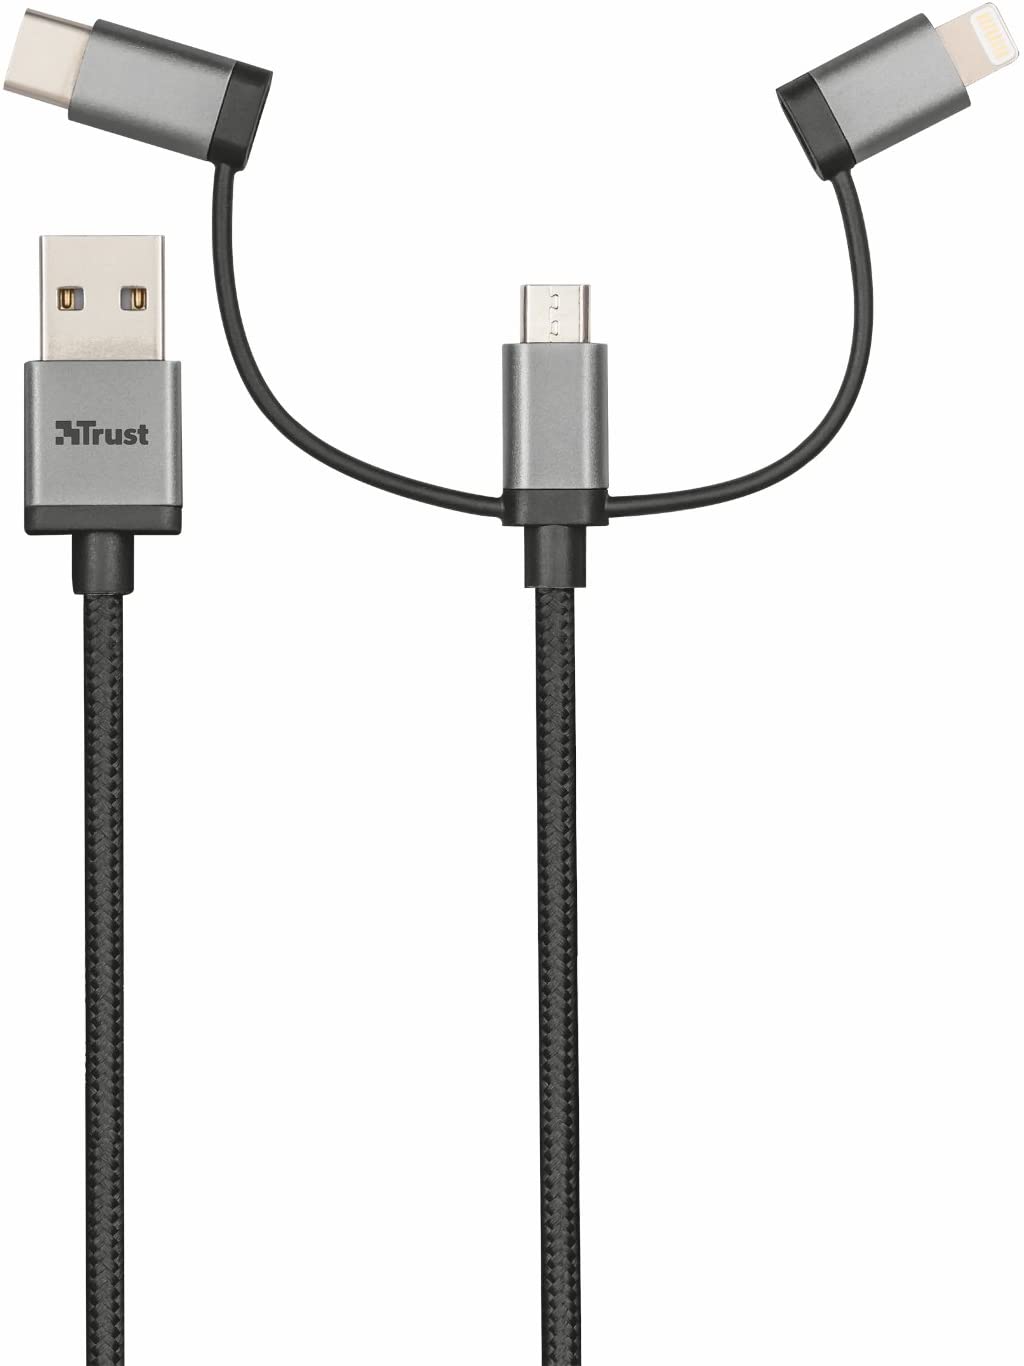 rust Urban  3-in-1 USB charge & sync cable 1m  -  Black - Cable USB 2.0 3 en 1